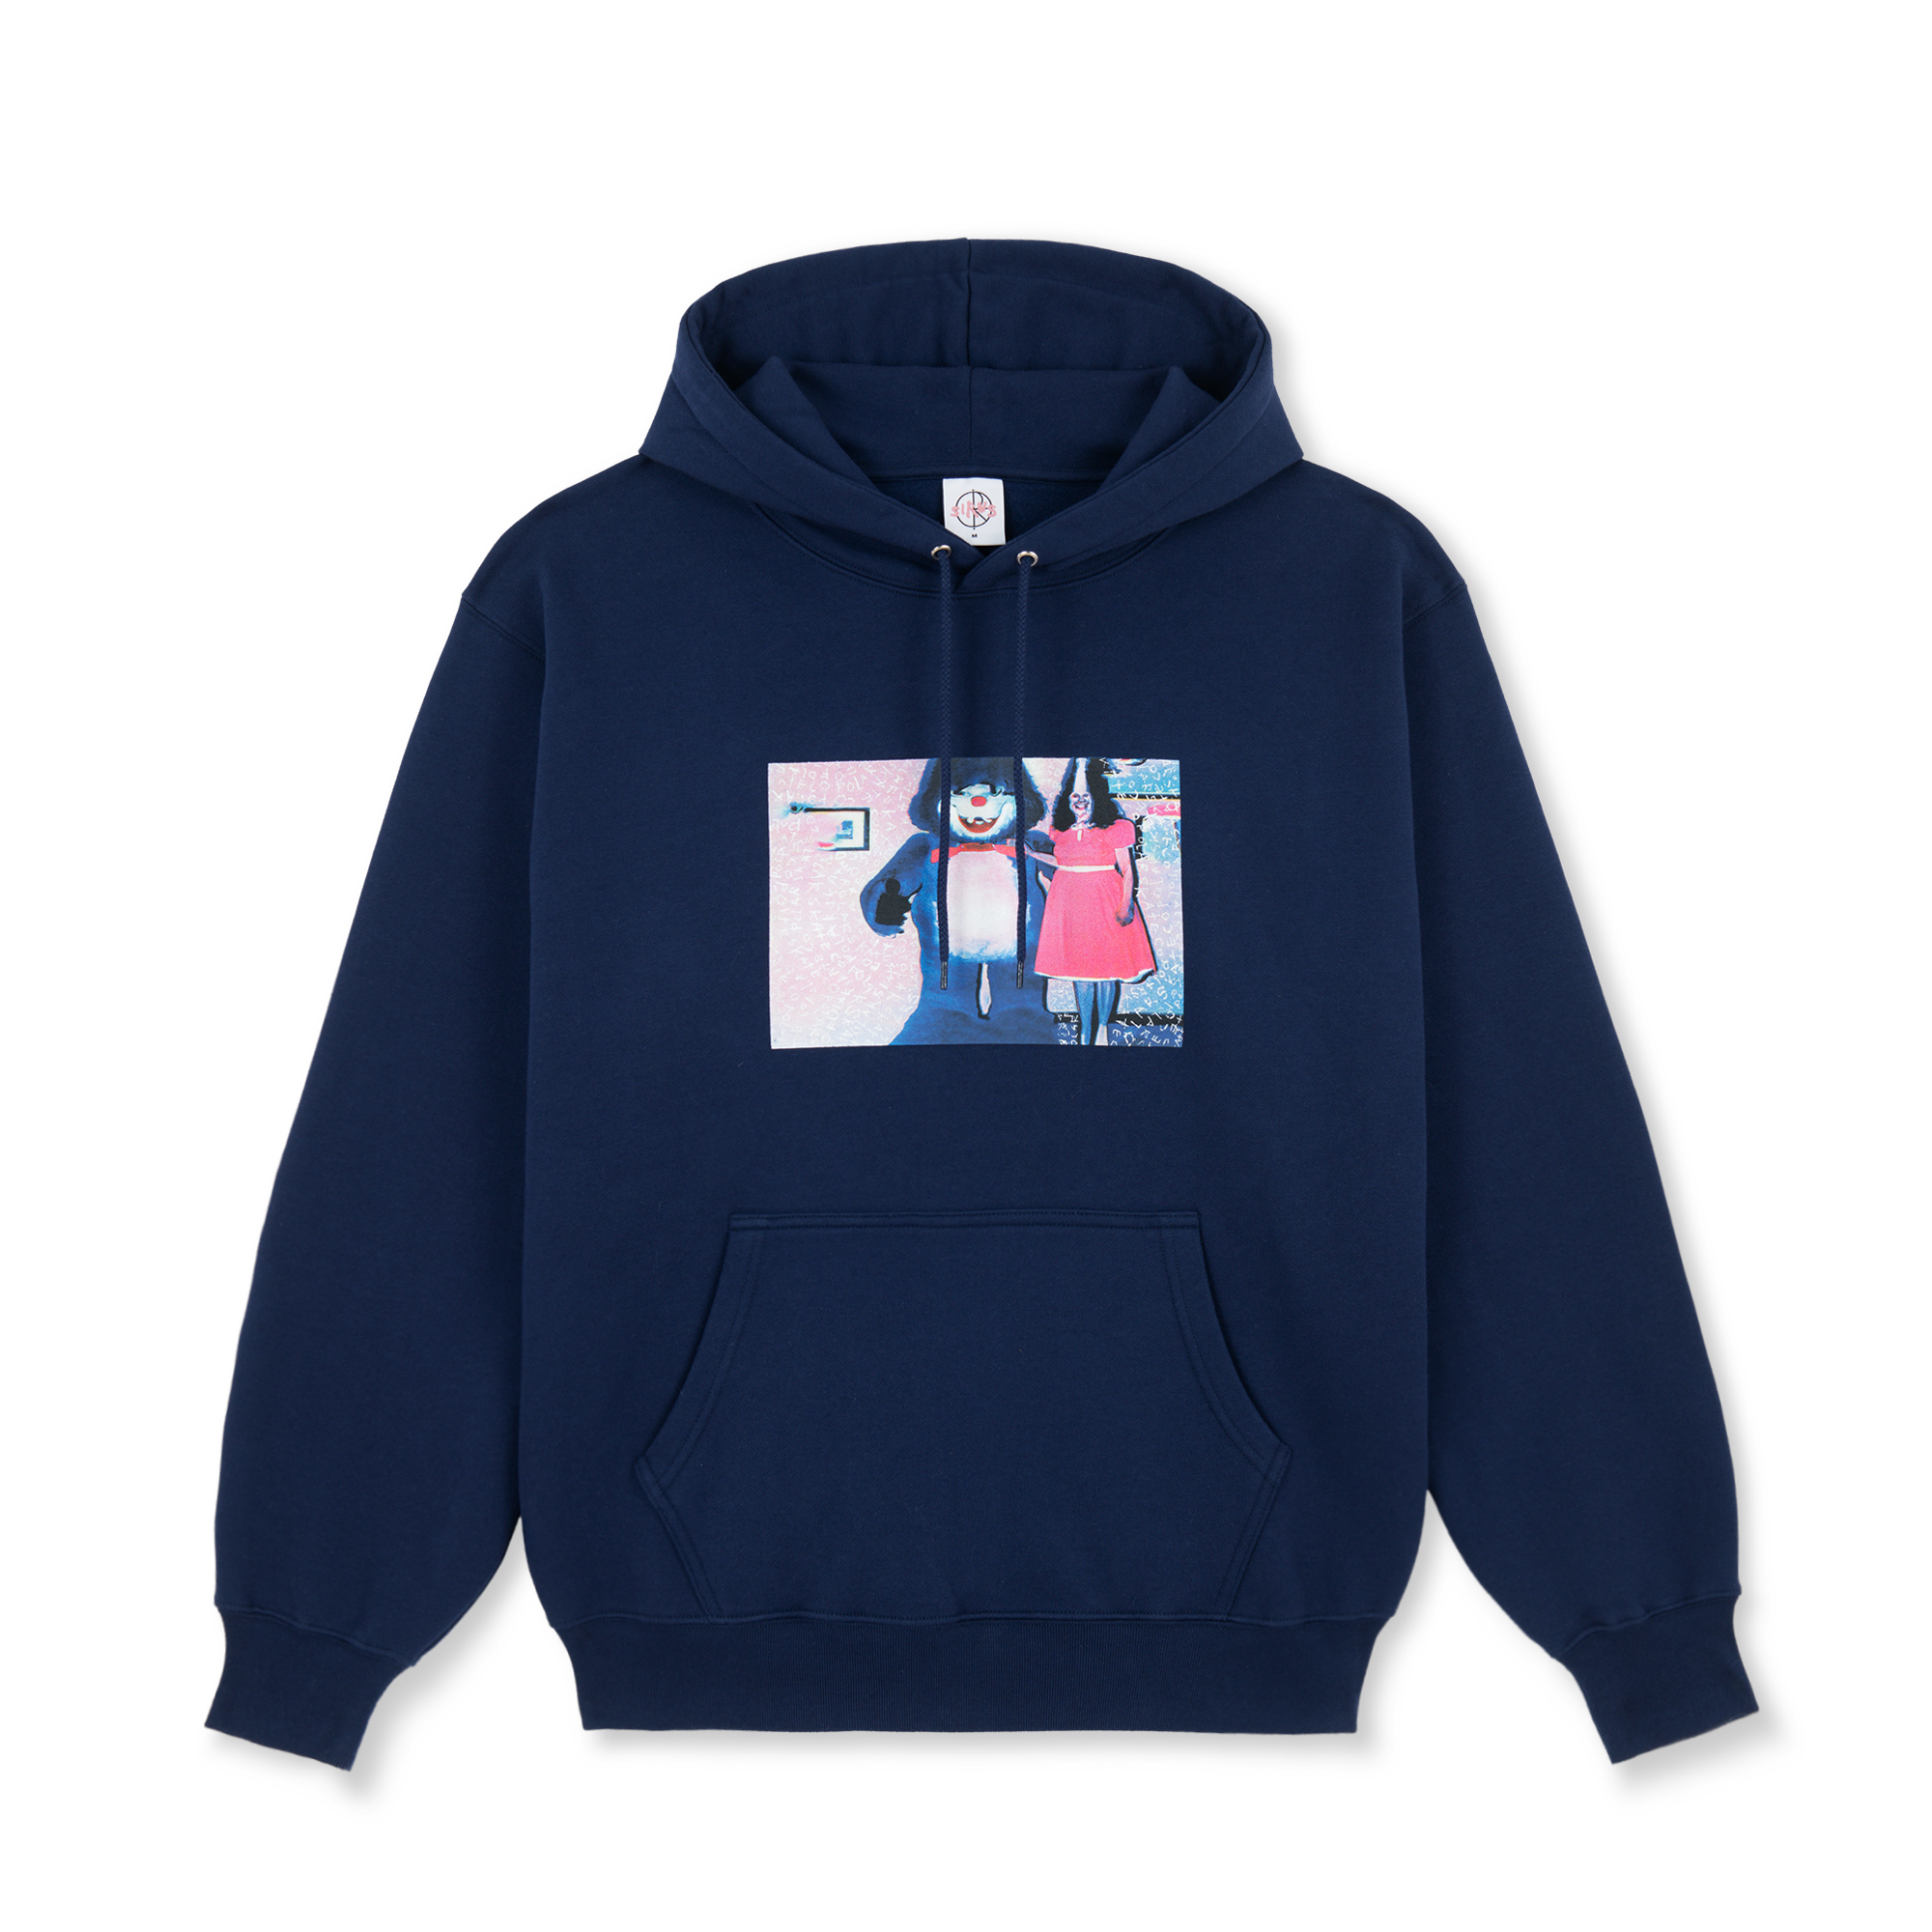 Dark blue polar hooded sweatshirt with pink and blue box logo on front. Free uk shipping on orders over £50